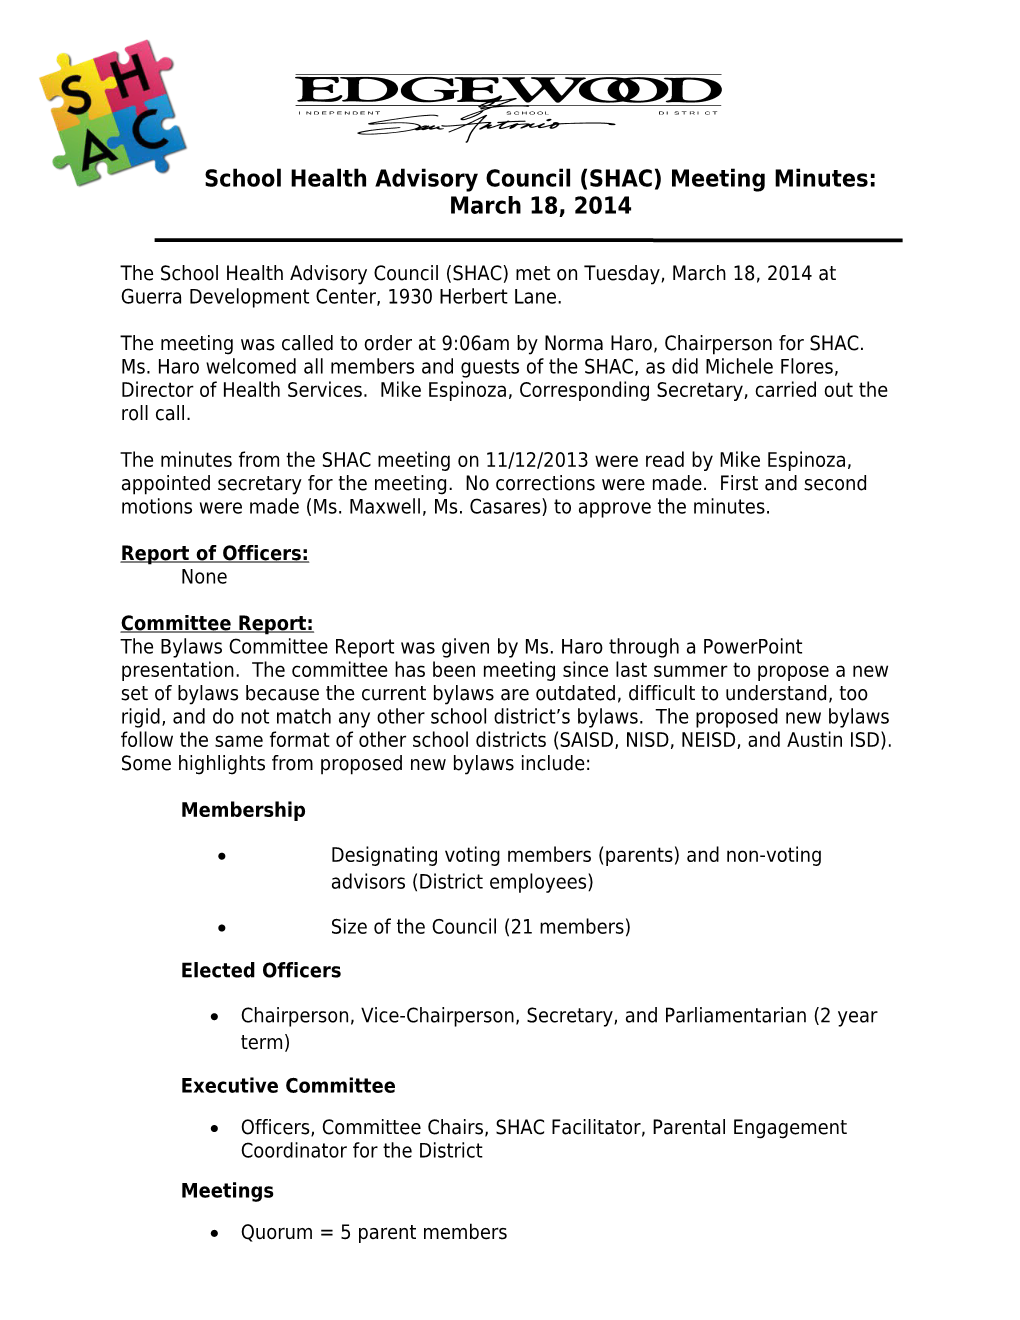 School Health Advisory Council (SHAC) Meeting Minutes: March 18, 2014